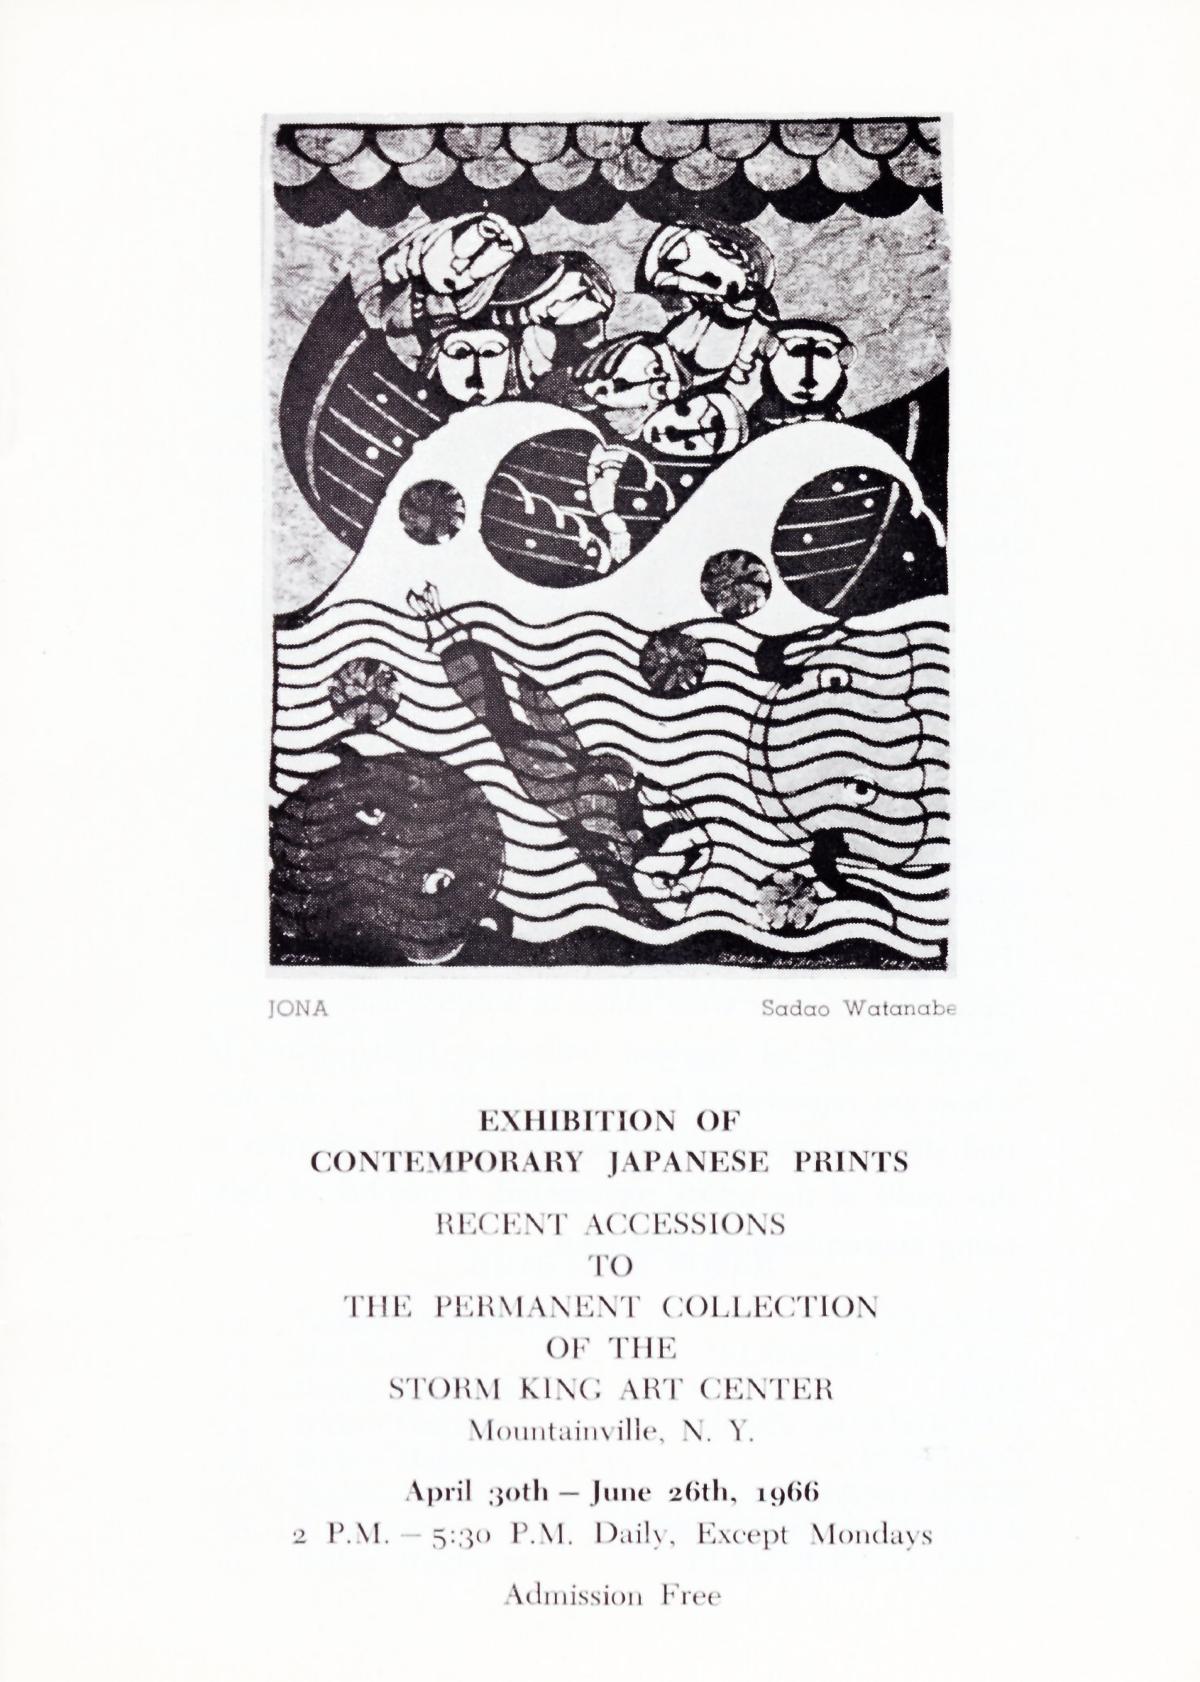 Exhibitions of Contemporary Japanese Prints: Recent Accessions to the Permanent Collection of the Storm King Art Center, April 30-June 26, 1966, brochure cover